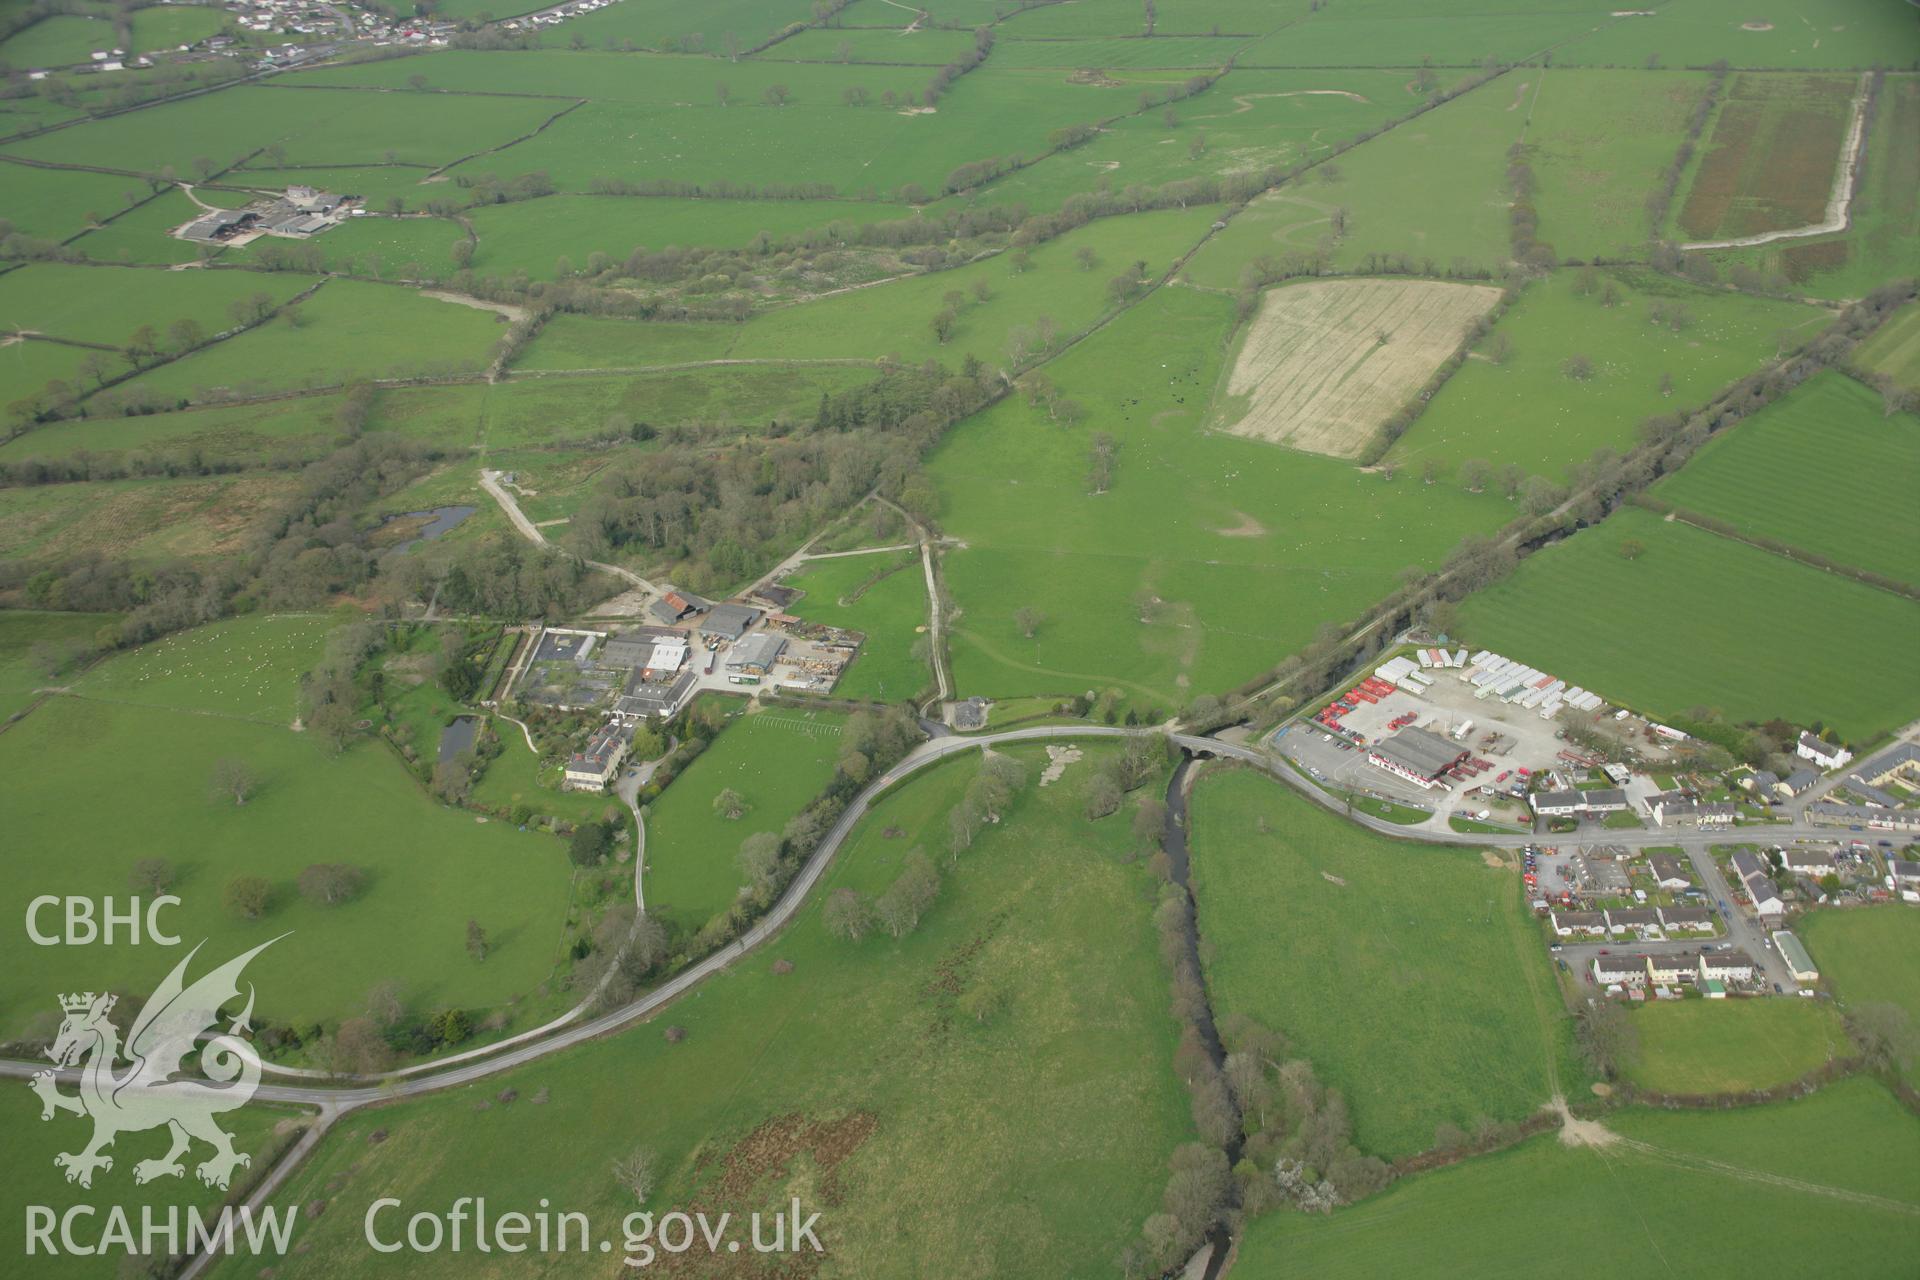 RCAHMW colour oblique aerial photograph of Talsarn Village. Taken on 17 April 2007 by Toby Driver